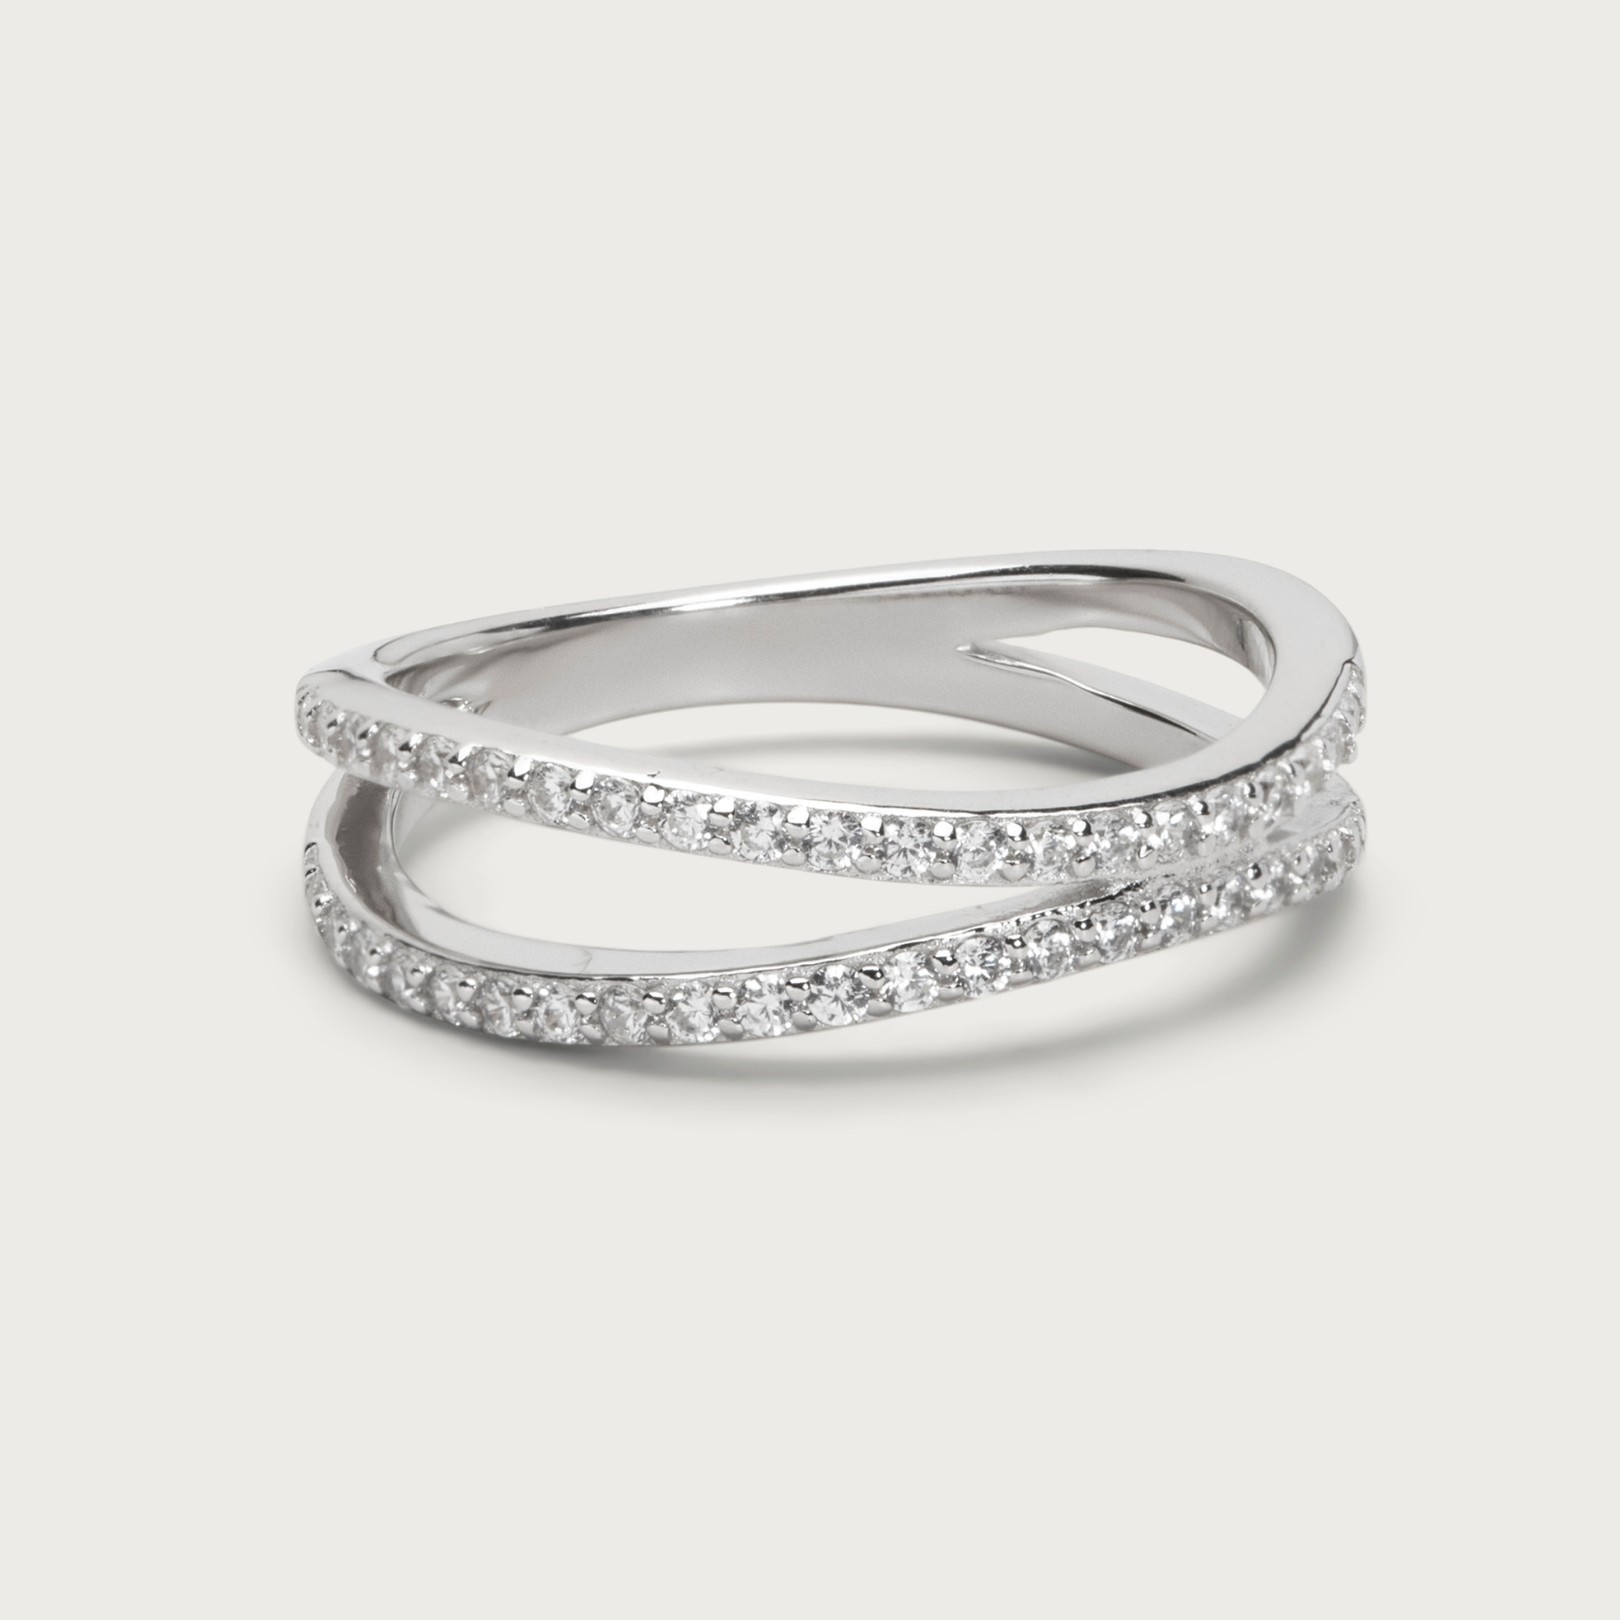 Sparkling double-ring